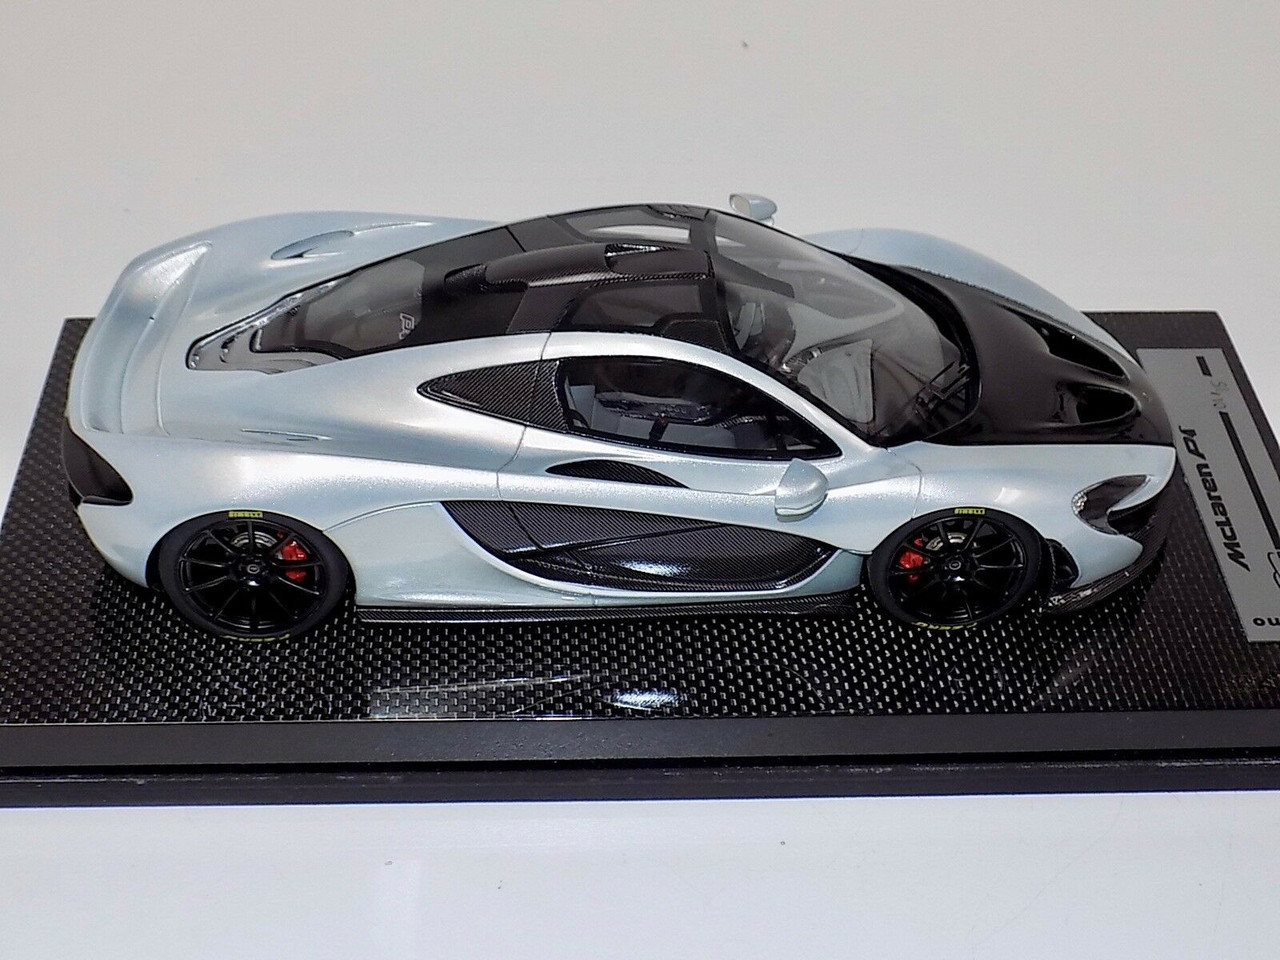 1/18 Tecnomodel McLaren P1 (Ice Silver with Black wheels & Black Hood) with Carbon Base Resin Car Model Limited 01/15